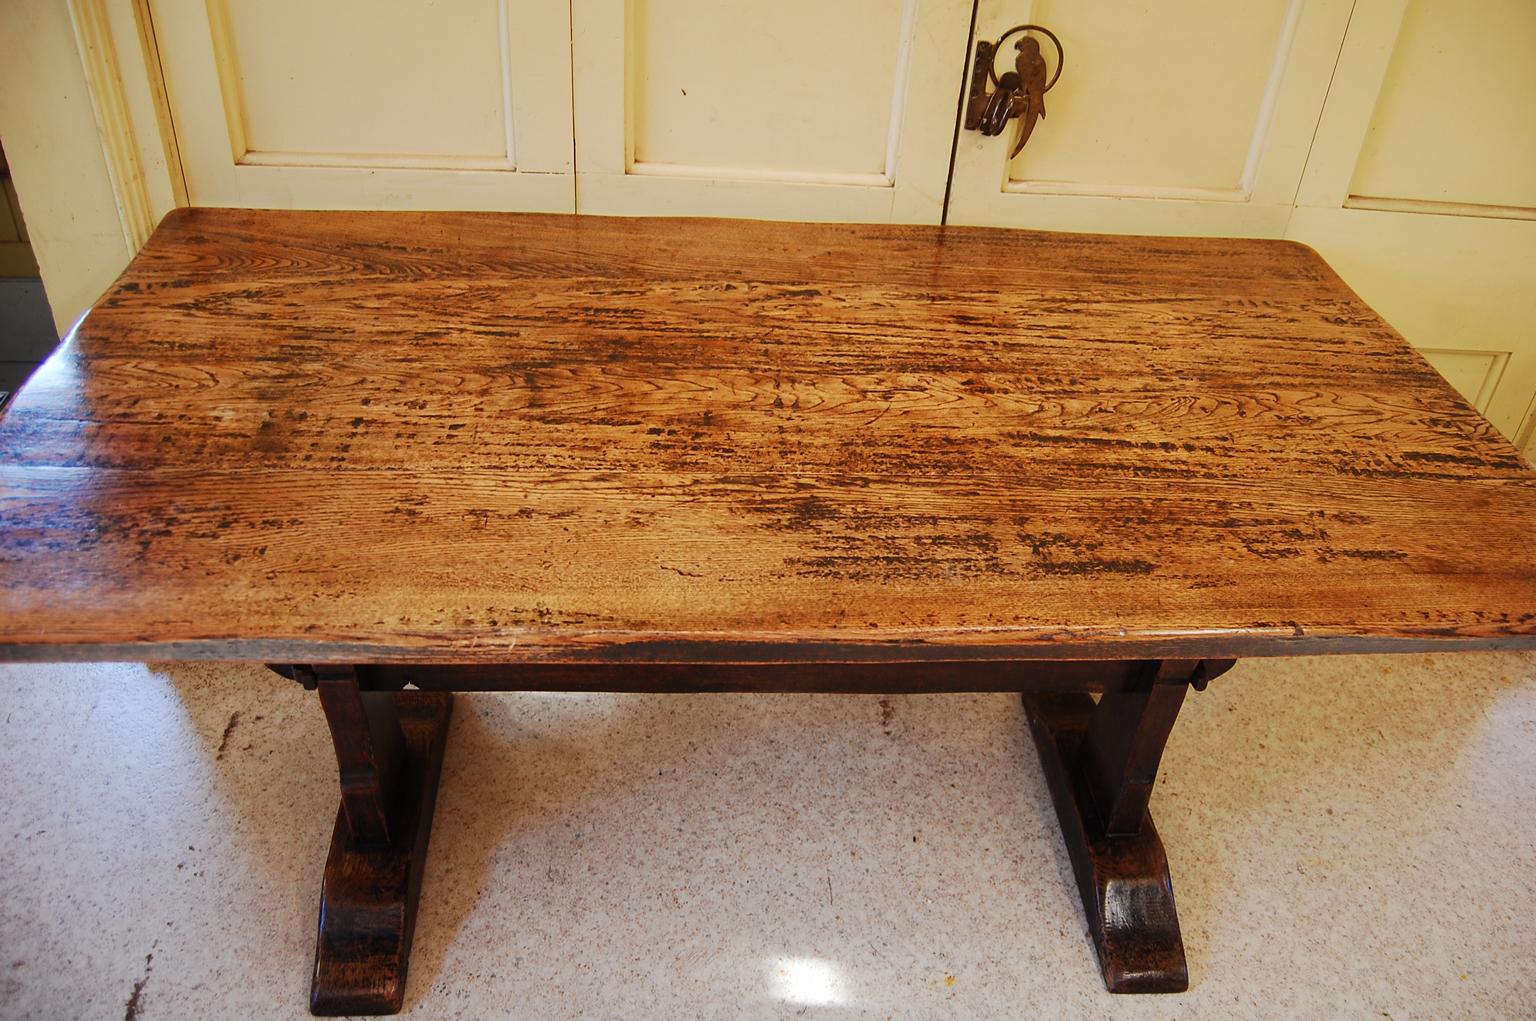  English Arts and Crafts period oak farmhouse trestle table.  This trestle table shows the care and craftsmanship that is a hallmark of the arts and crafts movement.  The top is made of thick oak planks, hand riven; the base is beautifully  hand